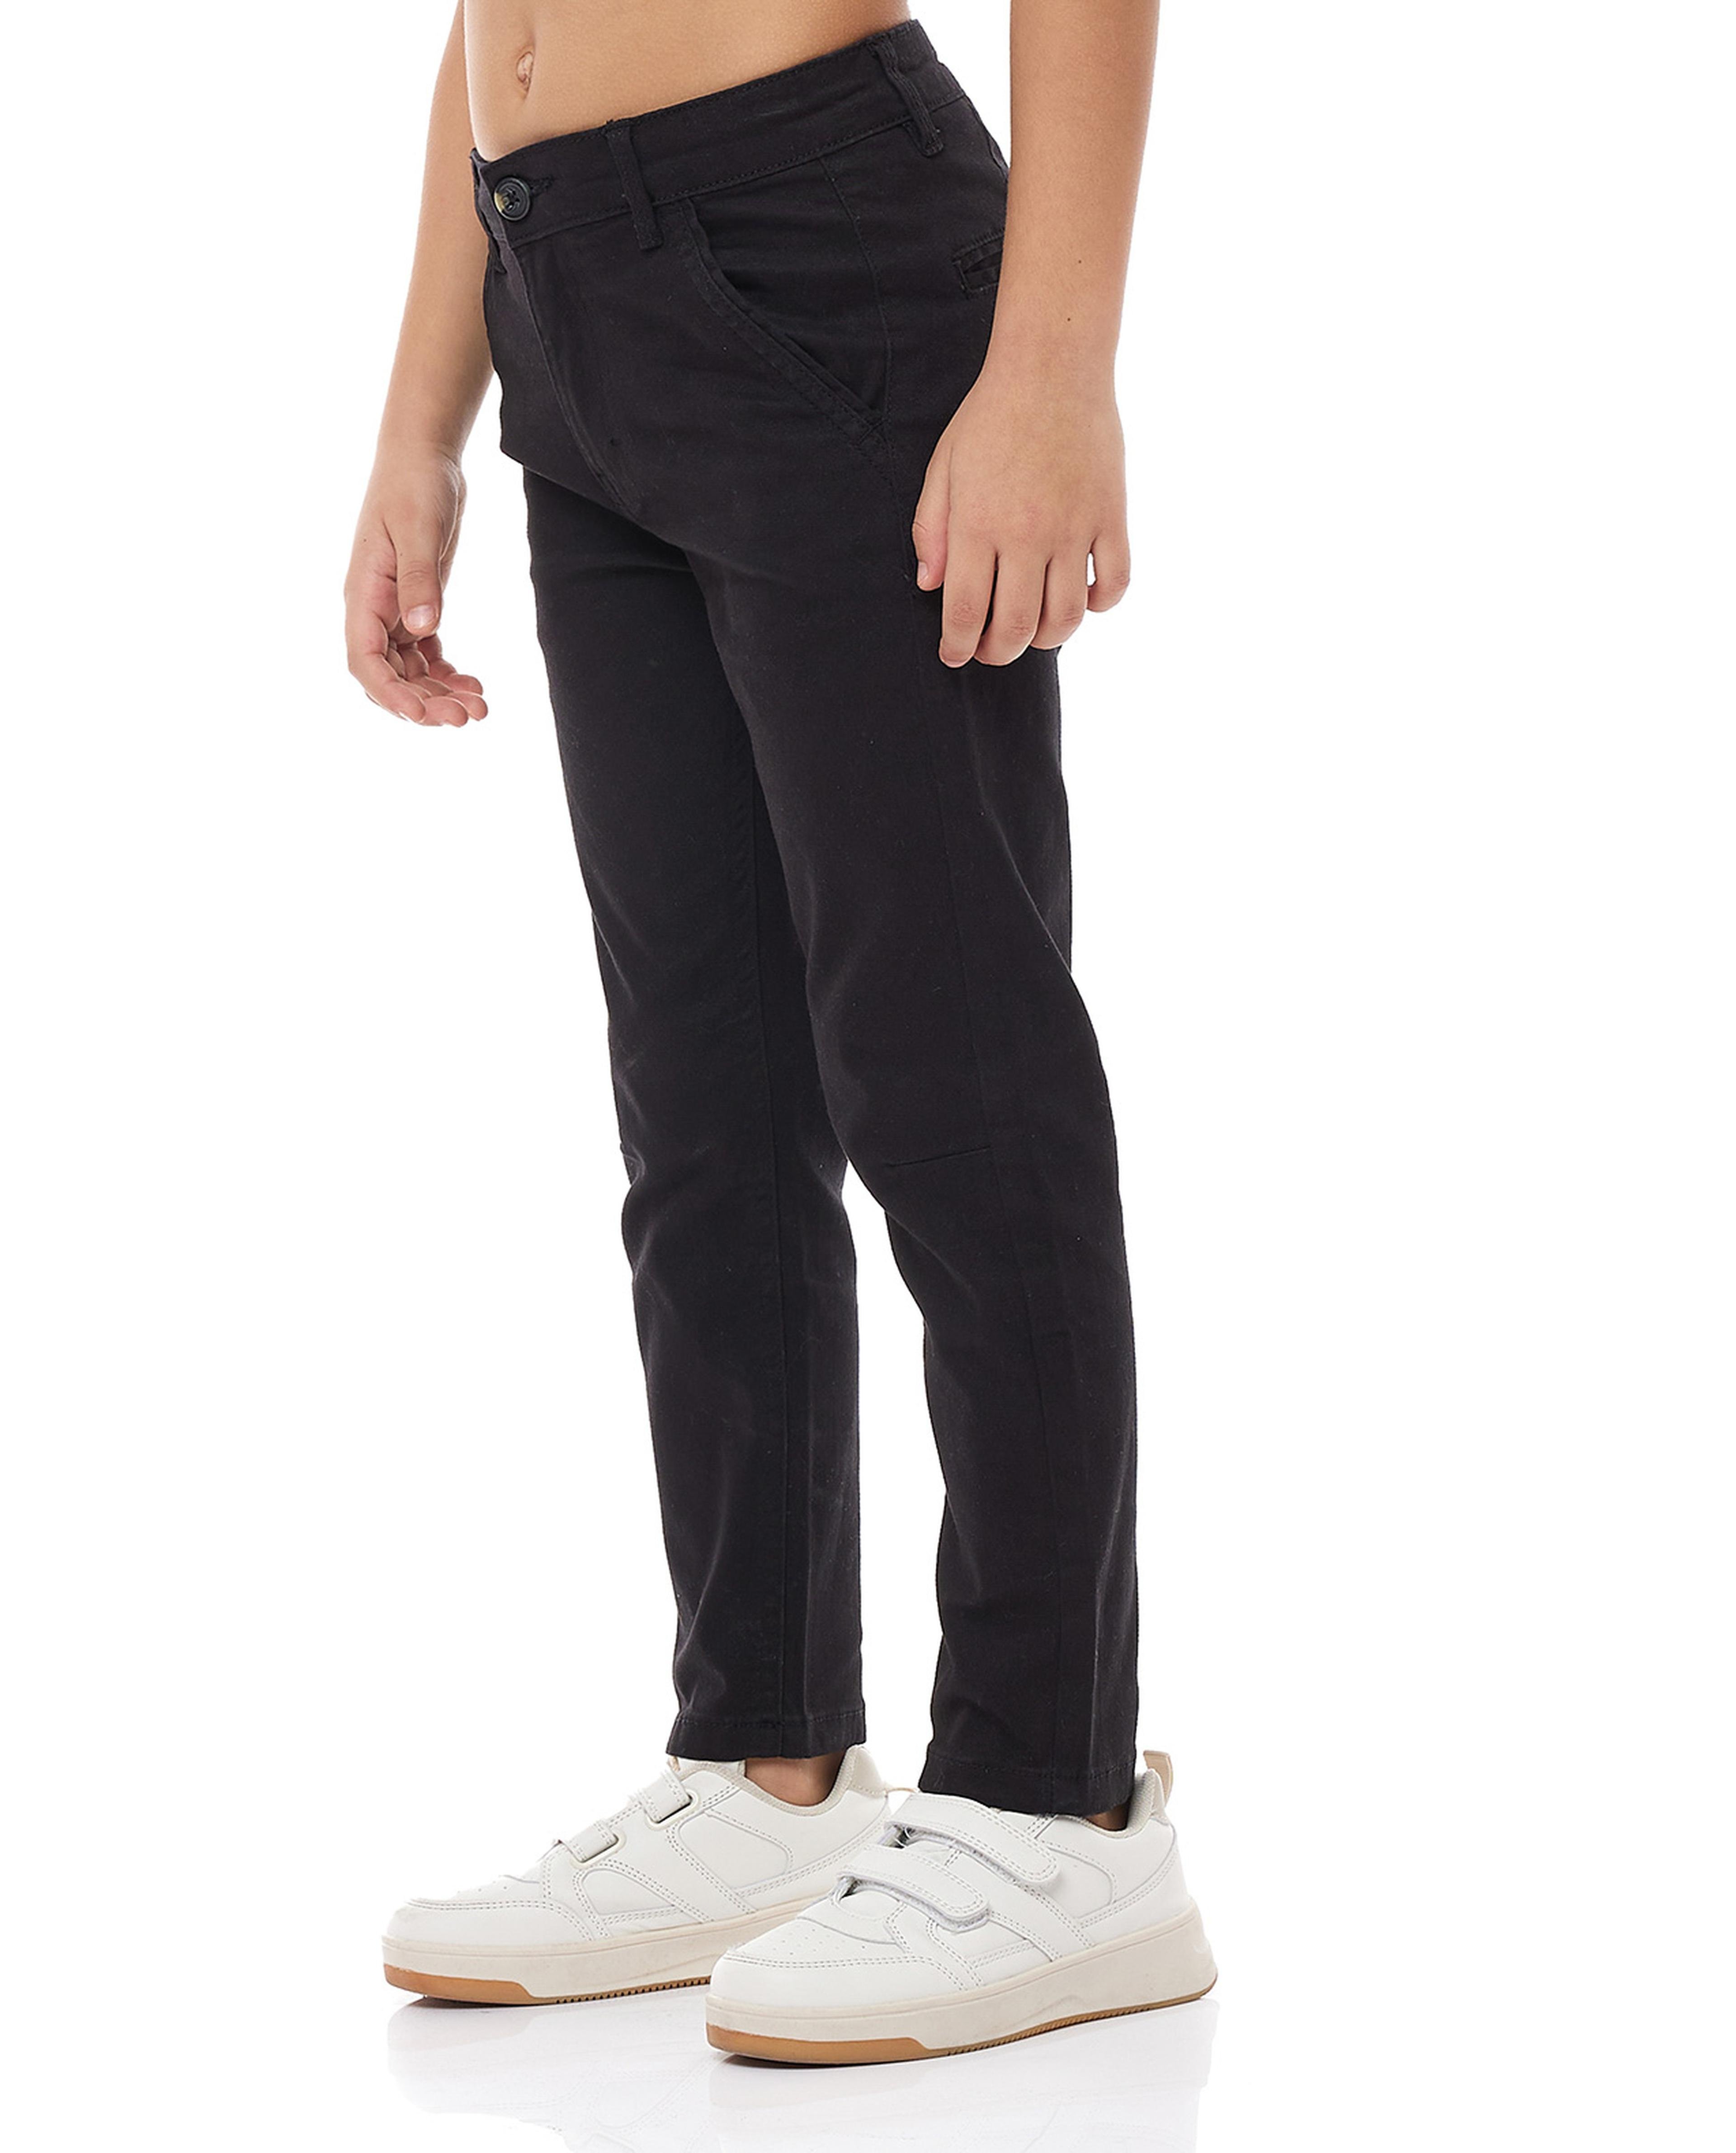 Solid Slim Fit Pants with Button Closure